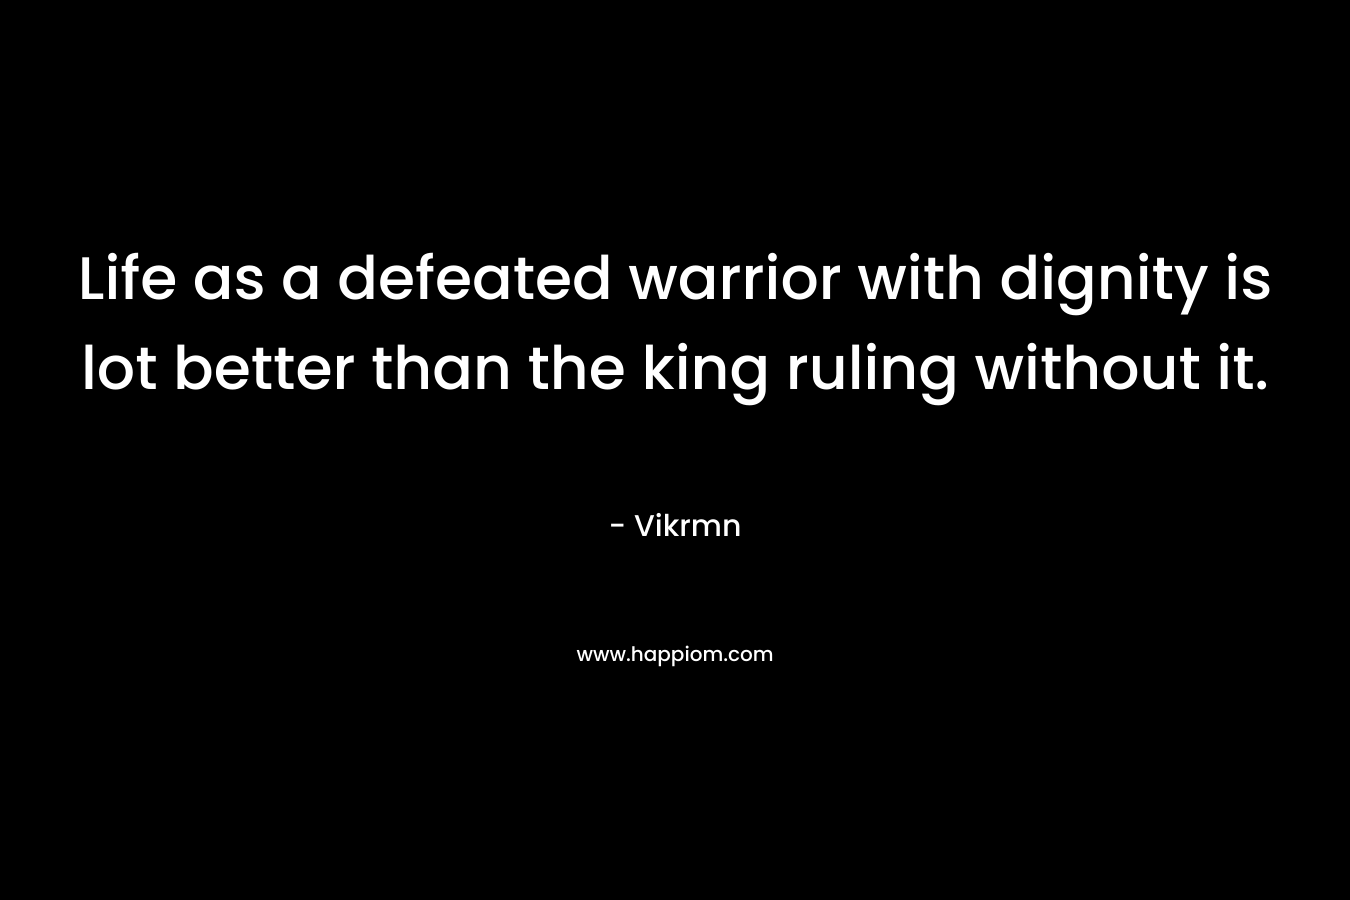 Life as a defeated warrior with dignity is lot better than the king ruling without it.